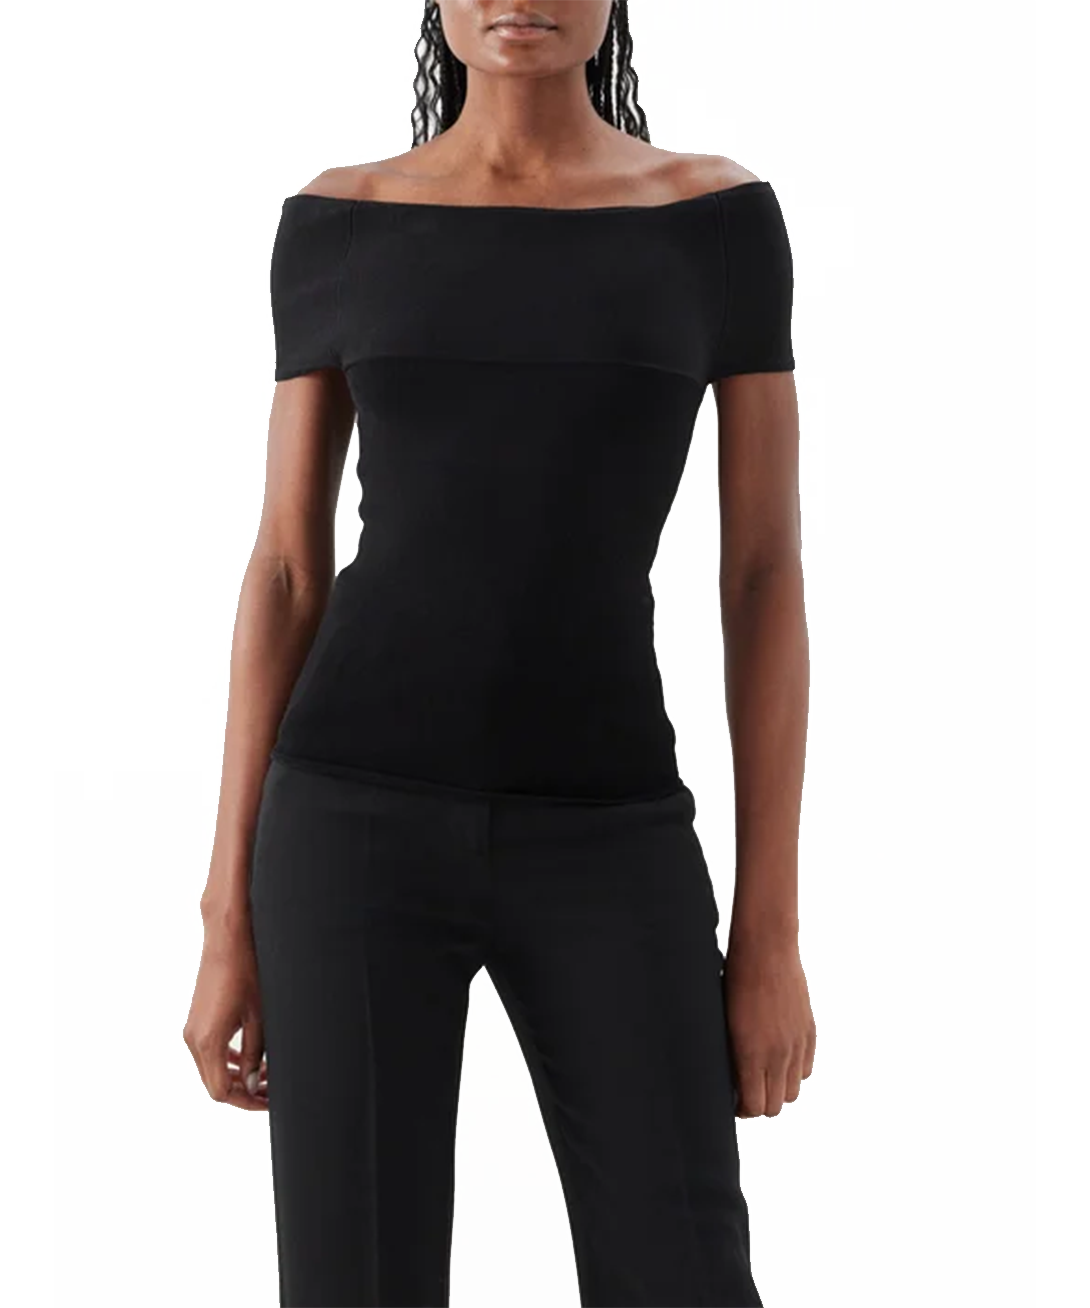 Halogen Ruched Knit Tank Top In Rich Black